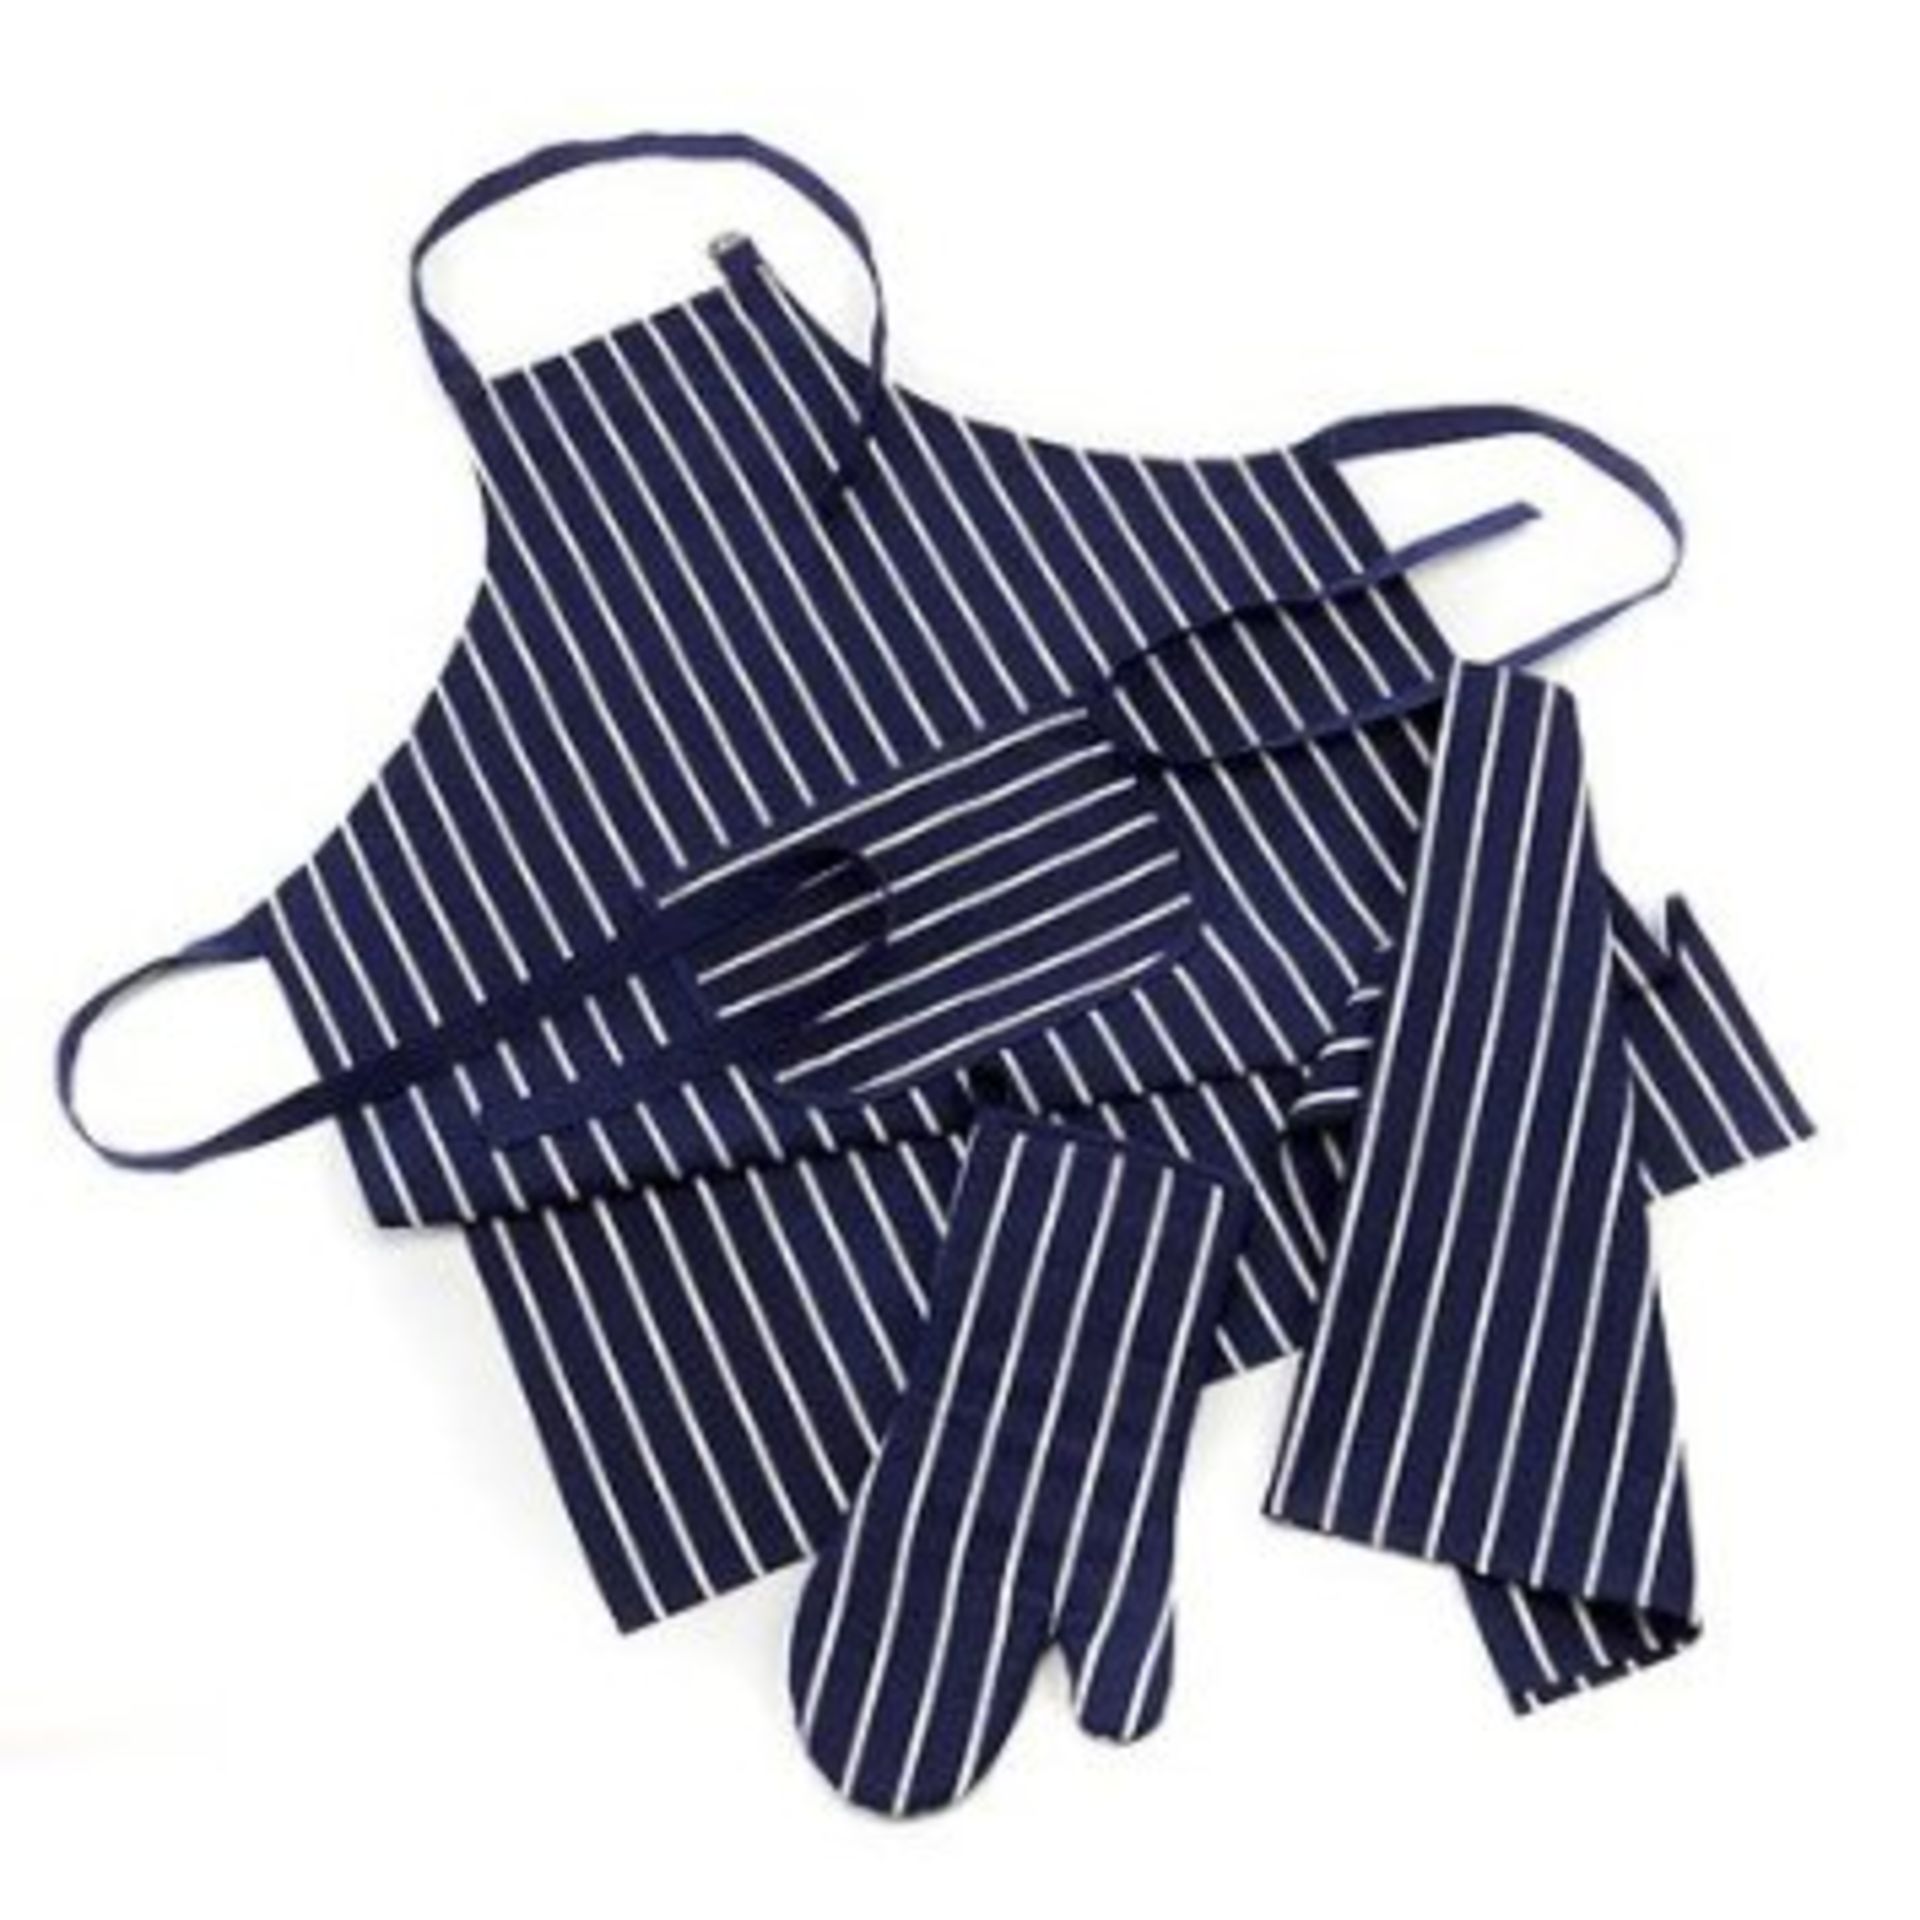 V Brand New 3 Piece Kitchen Set Of Double Oven Glove Printed Glass Cloth & A Bib Apron X 2 YOUR